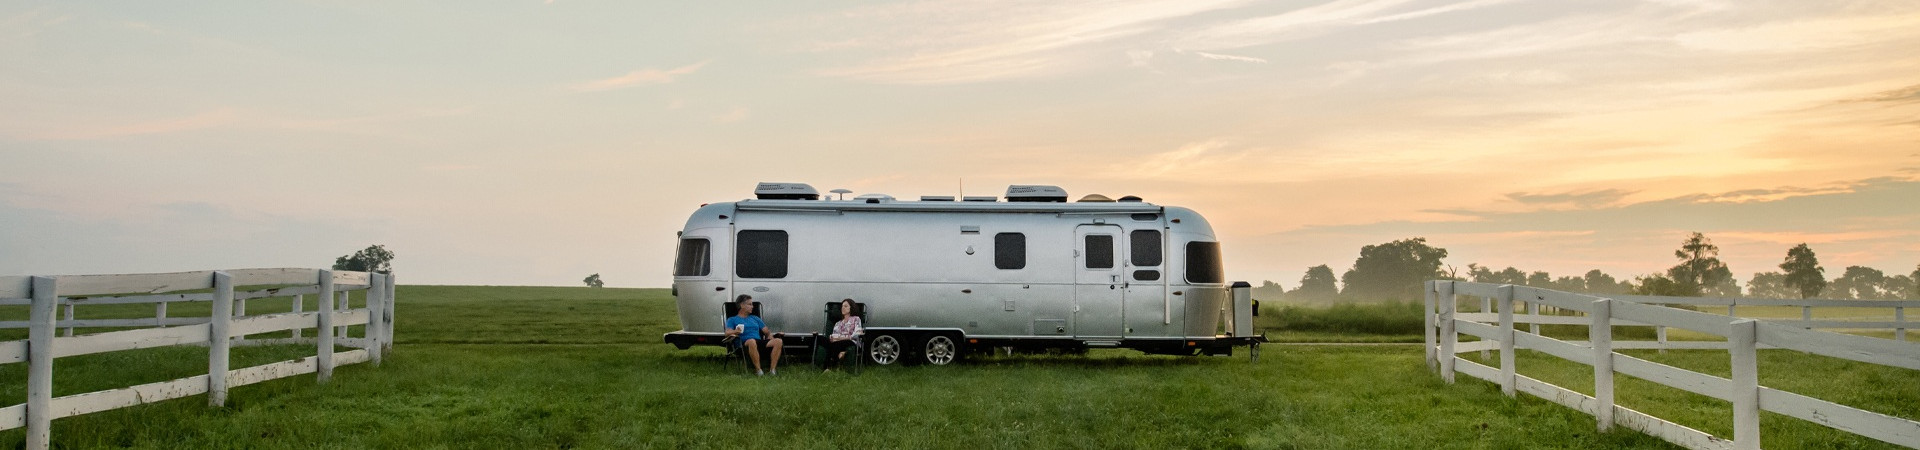 2019 Airstream for sale in Airstream Orange County, Midway City, California